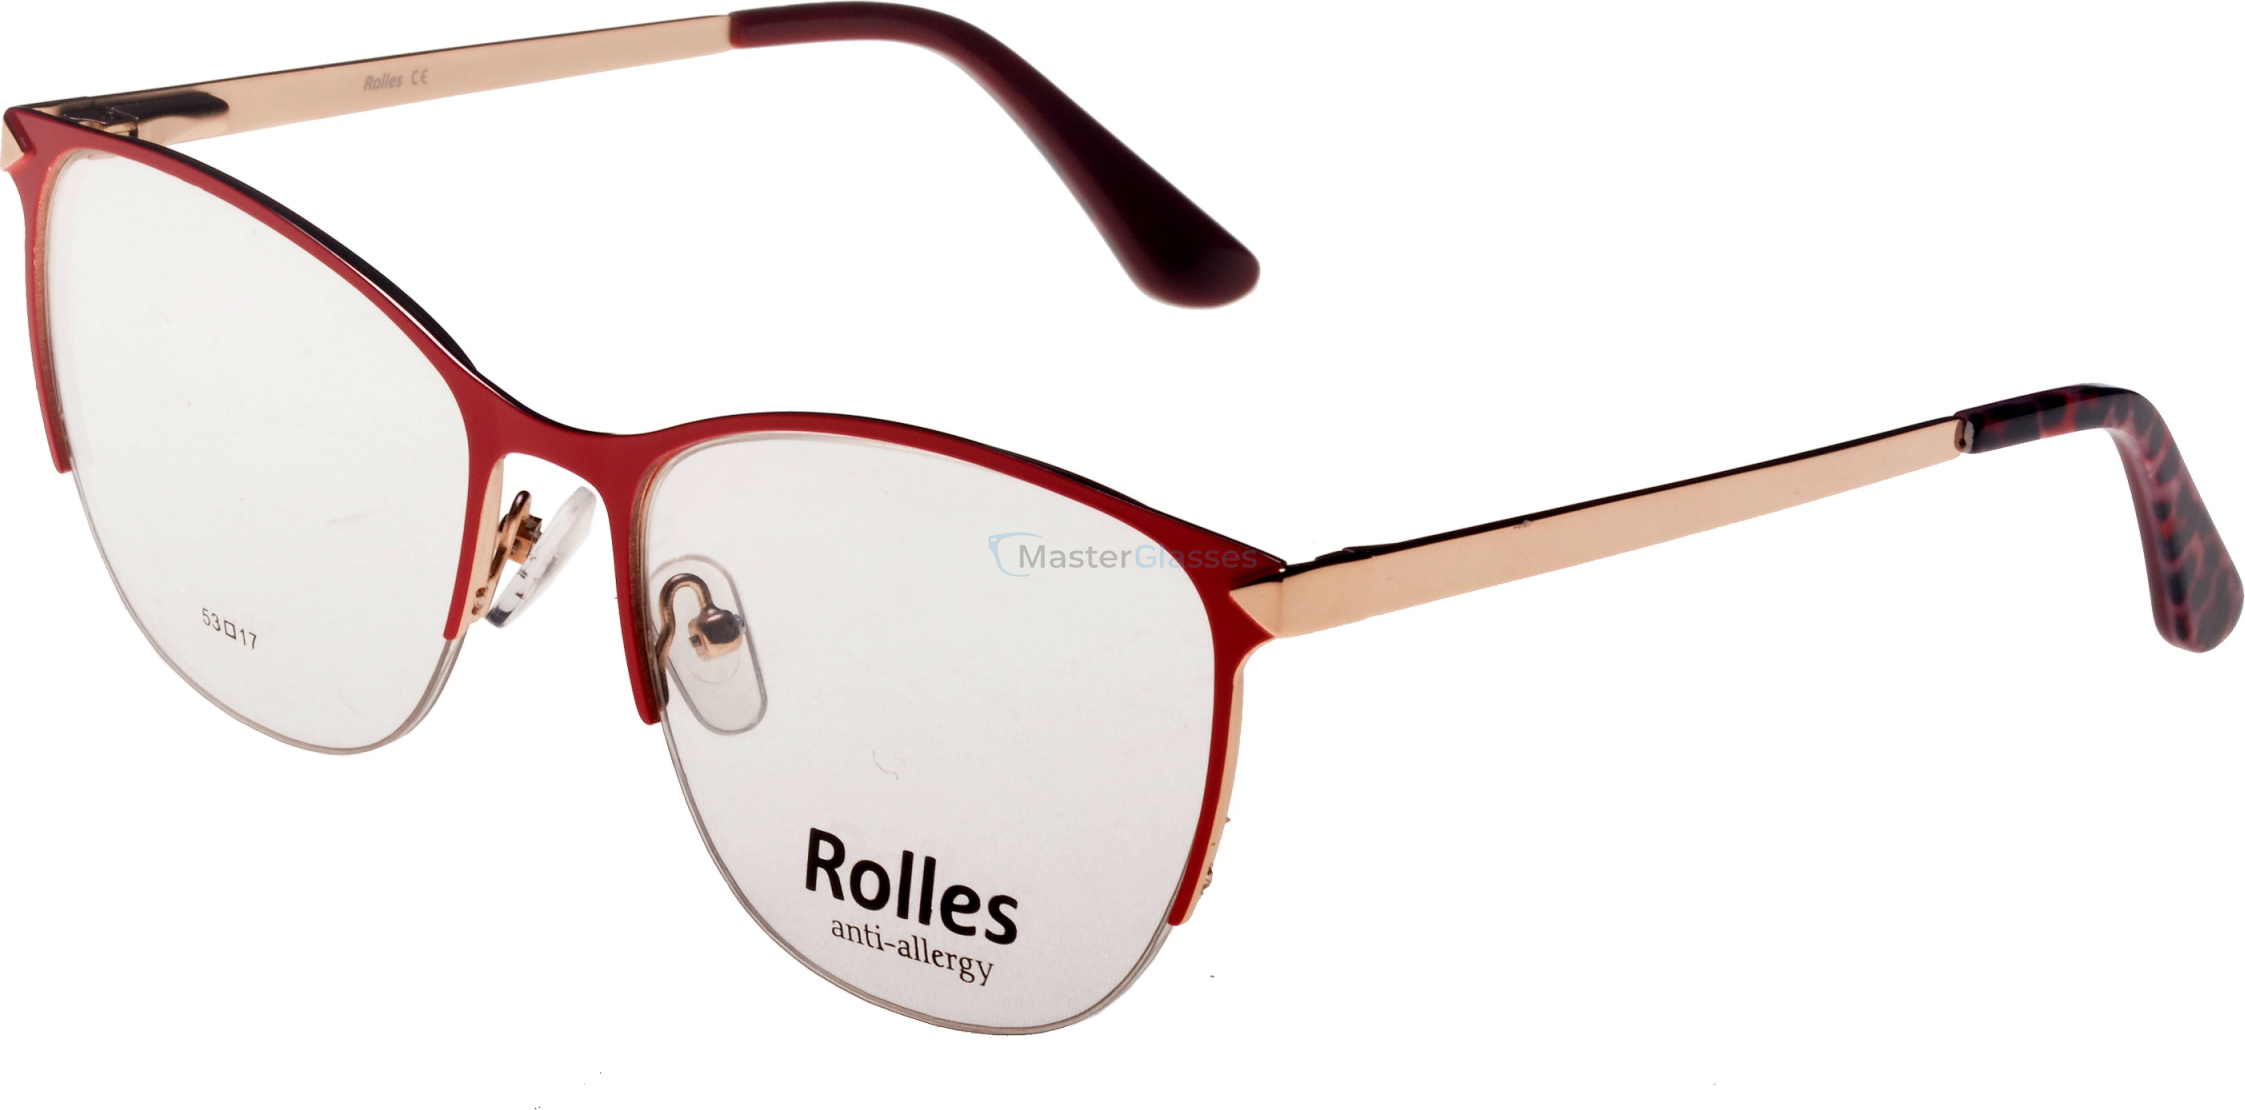  Rolles 700 01